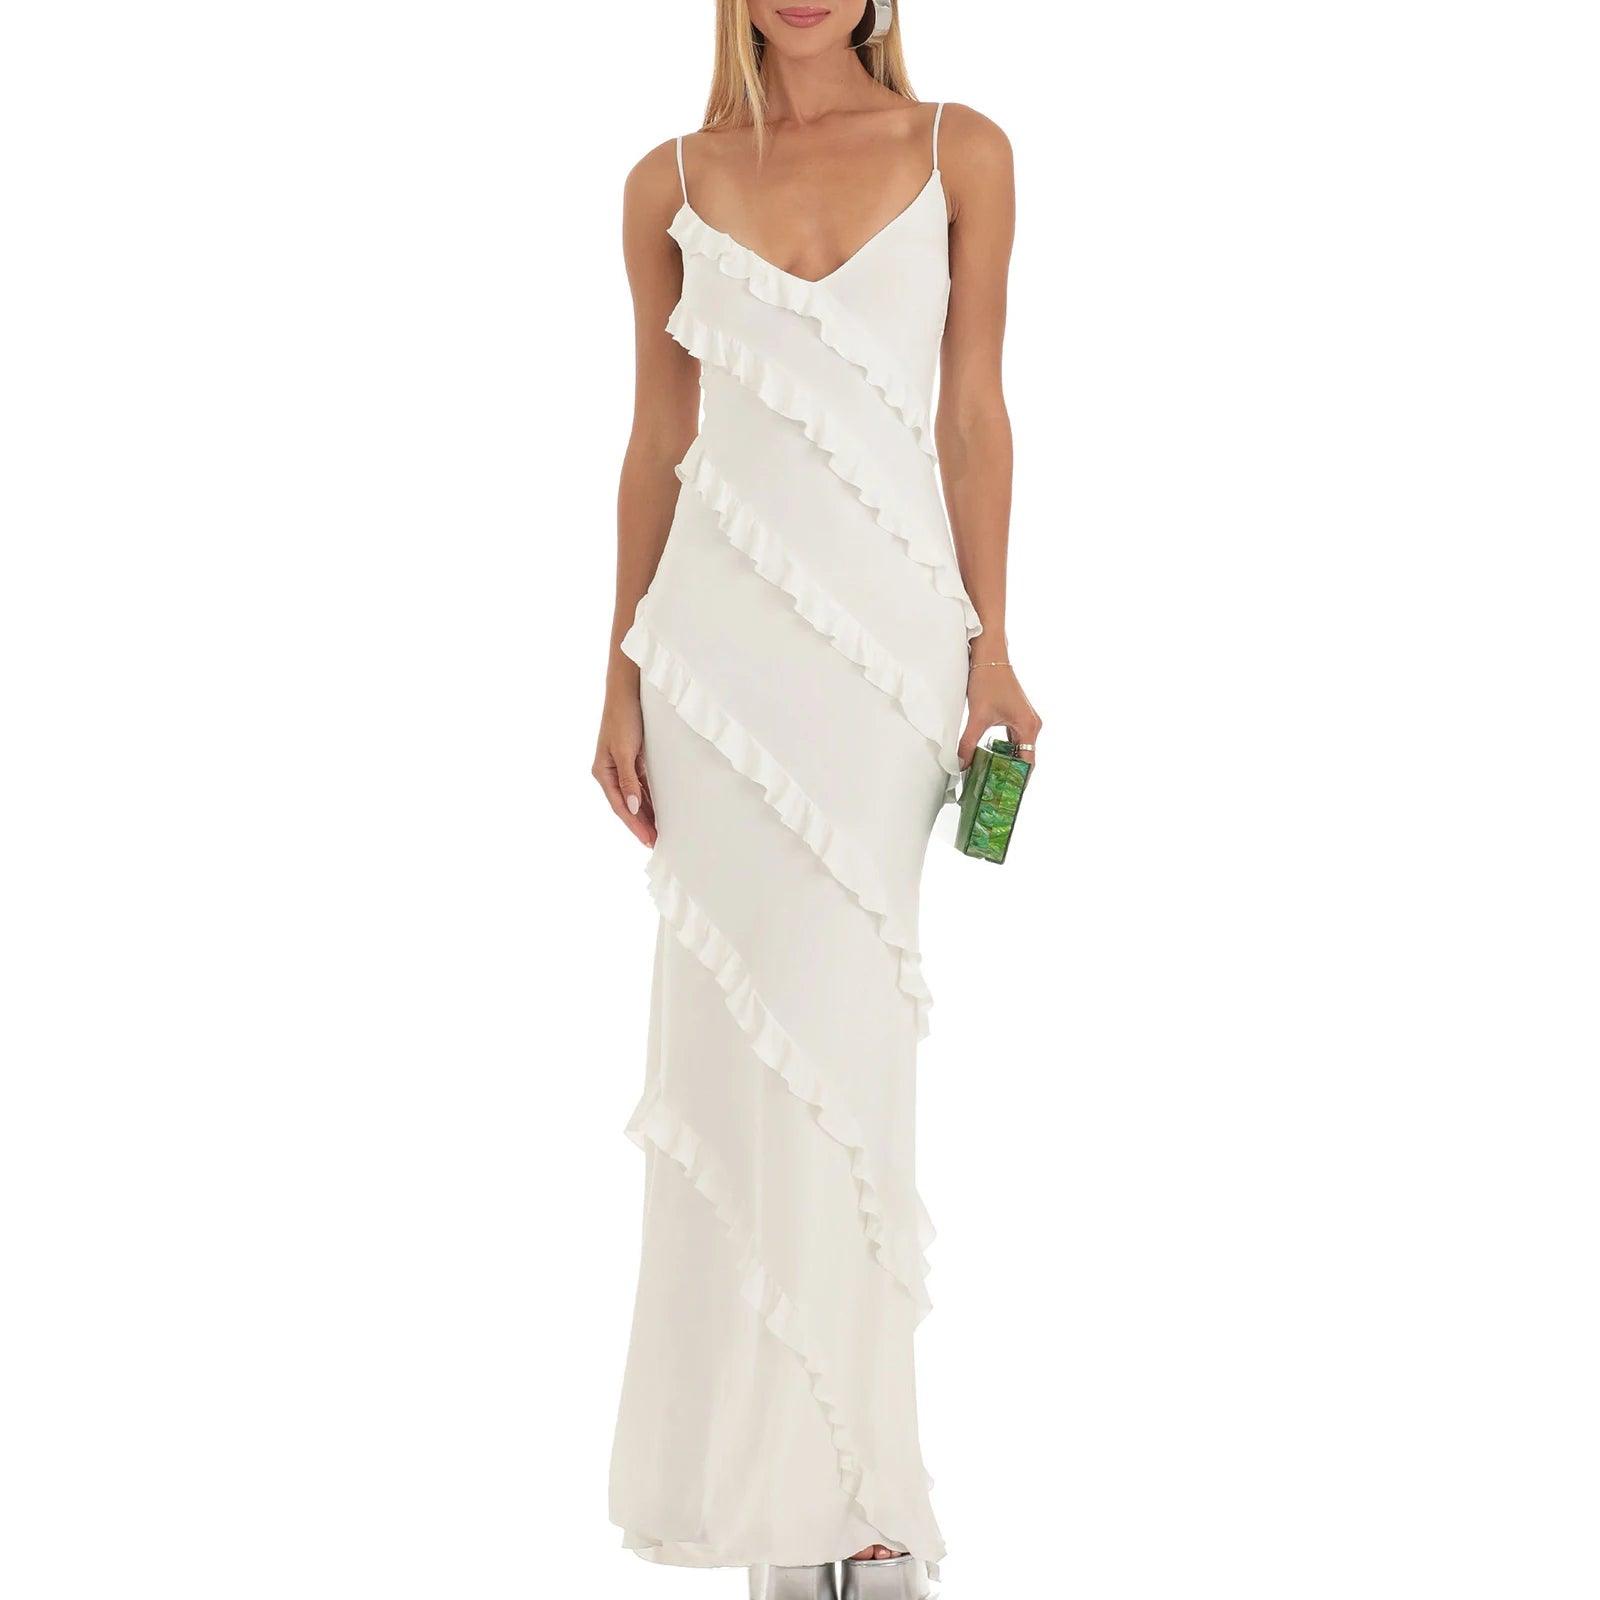 Robin Ruffles Backless Dress - White from The House of CO-KY - Dresses